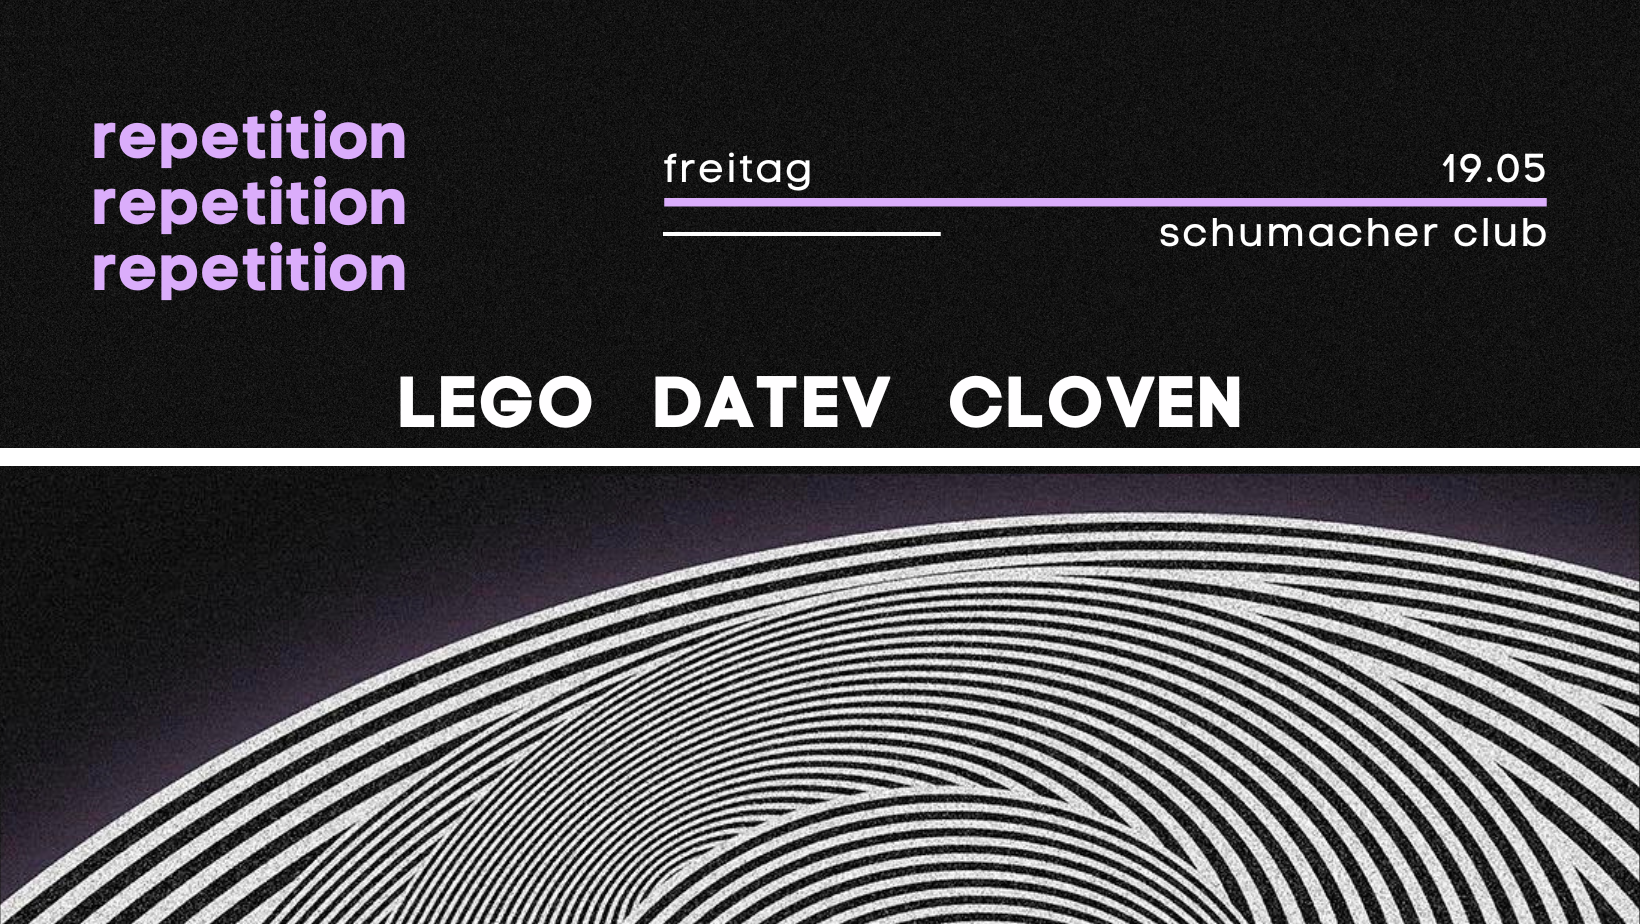 Repetition with lego (Parabel), Cloven & DATEV - フライヤー表